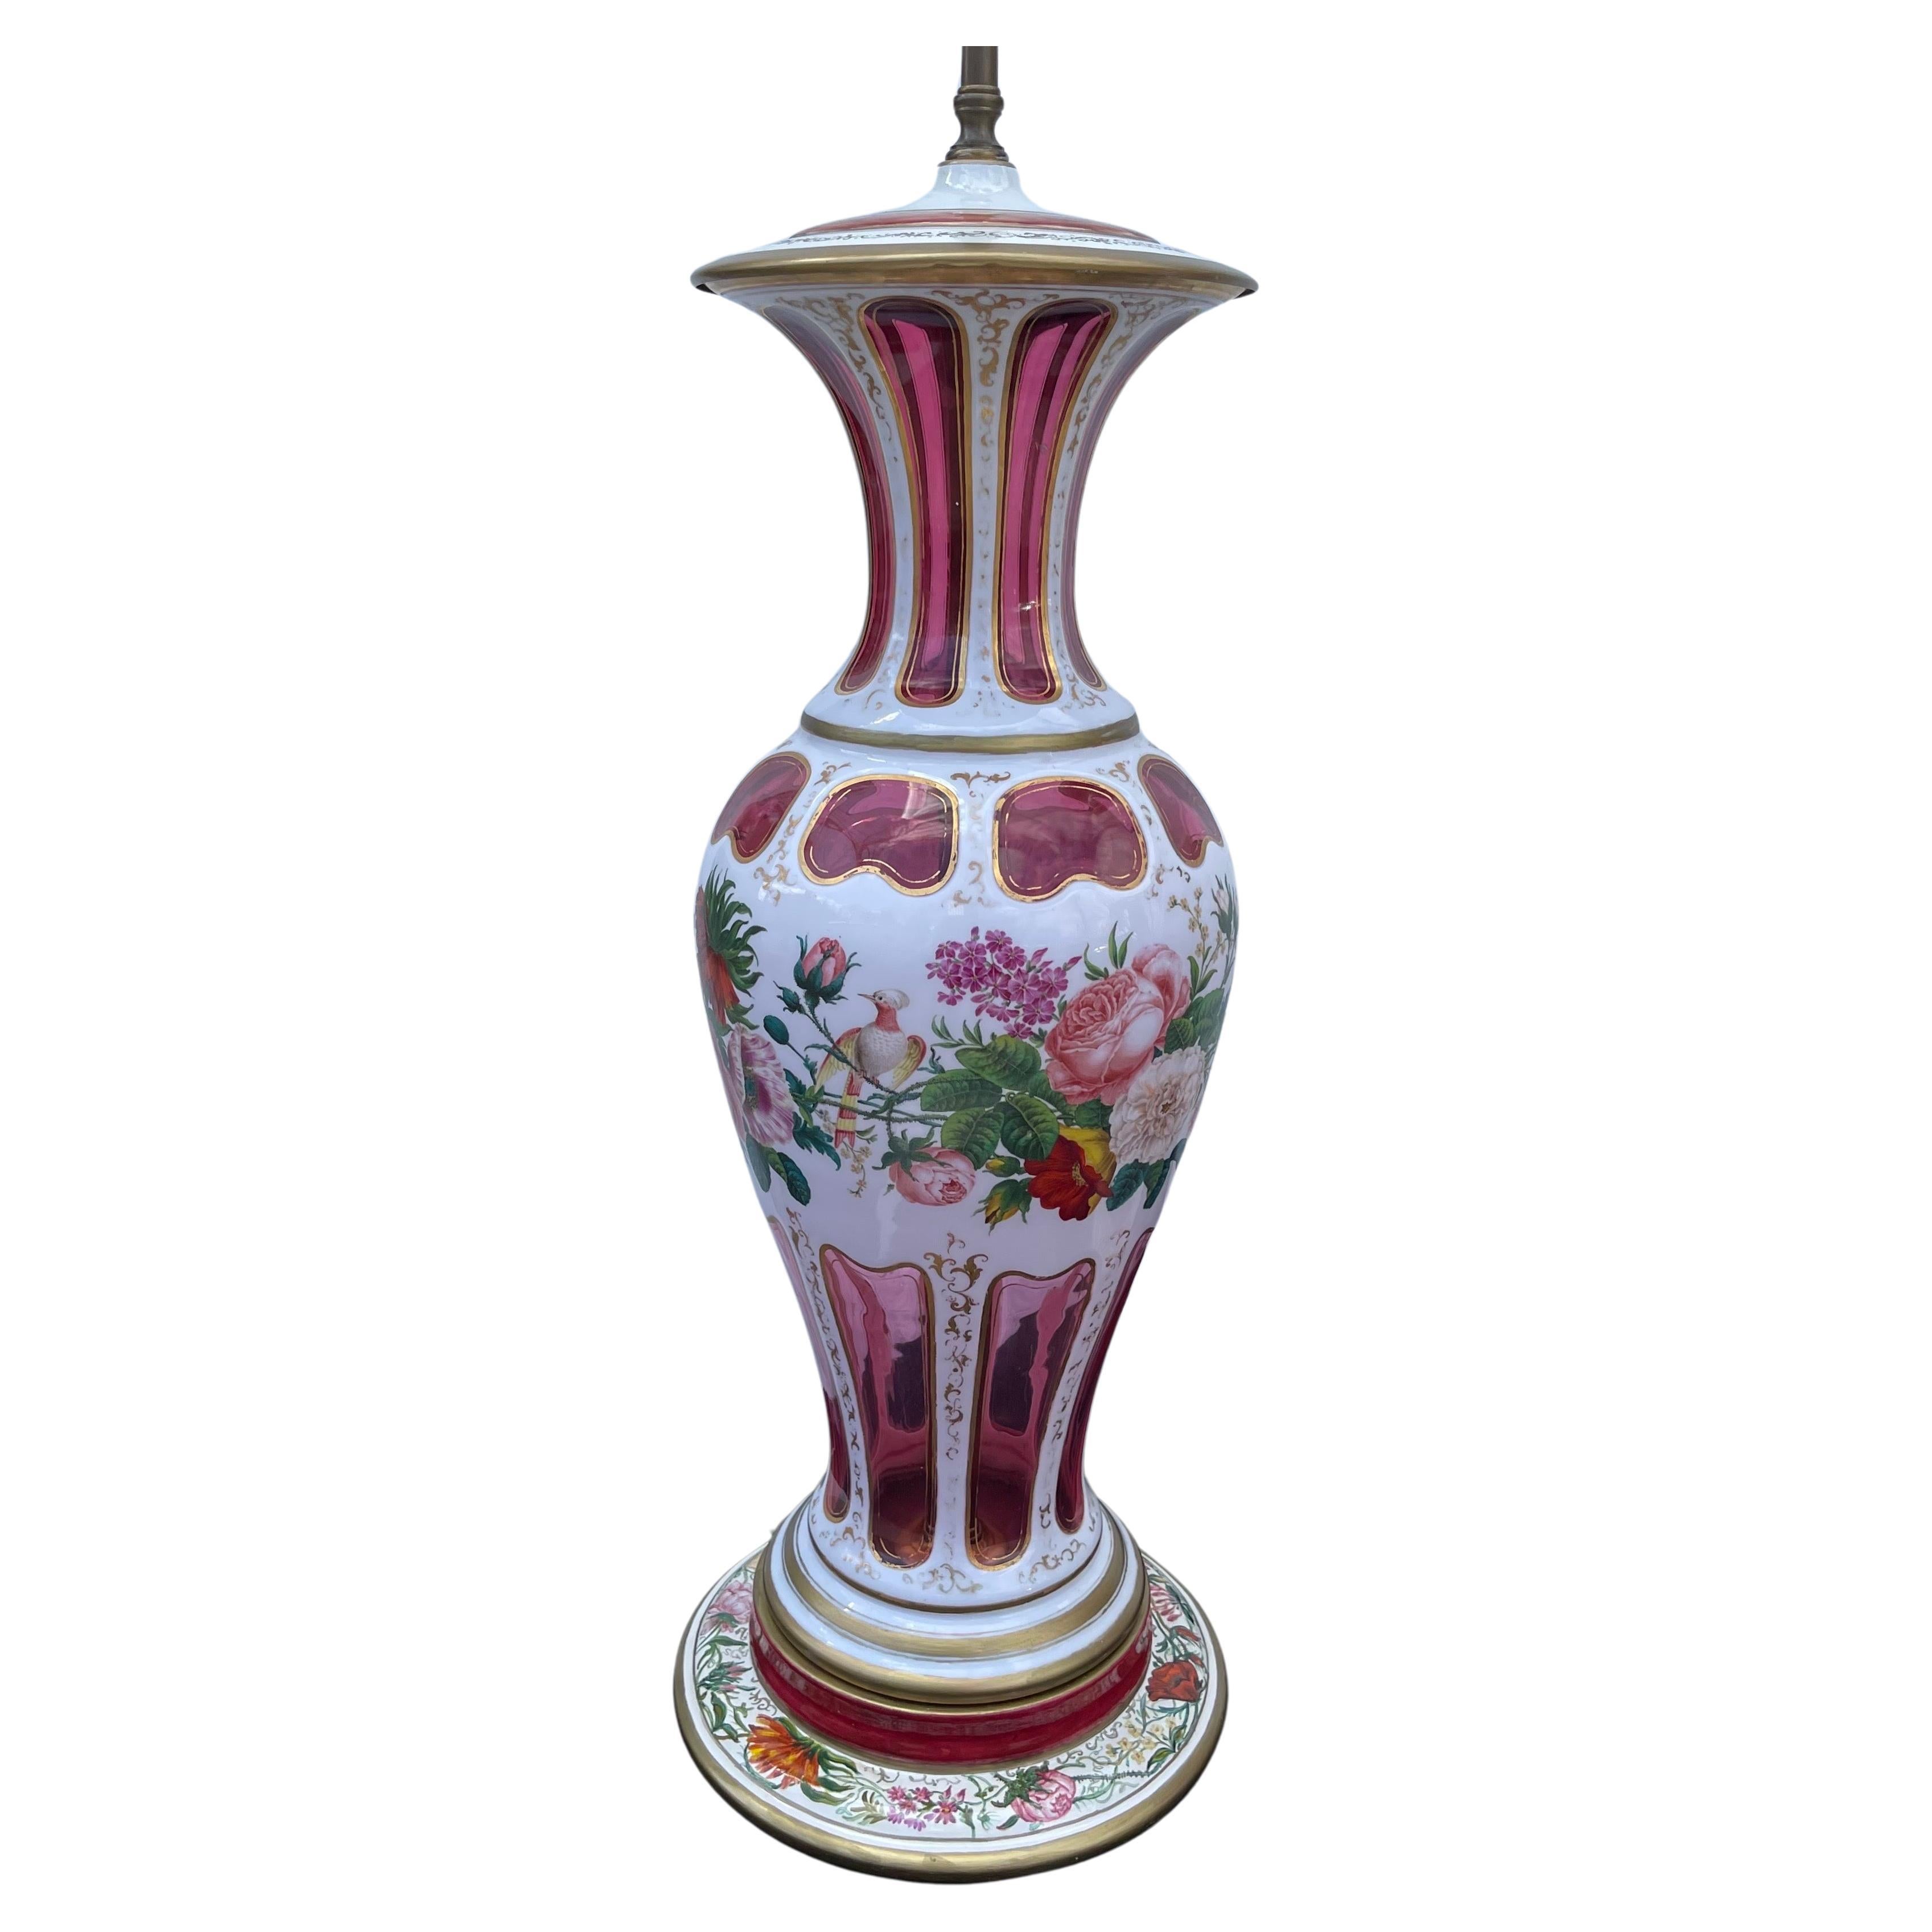 A Wonderful Large Pair Of Bohemian Cranberry Glass With Hand Painting Lamps, The Vases Alone Are 21